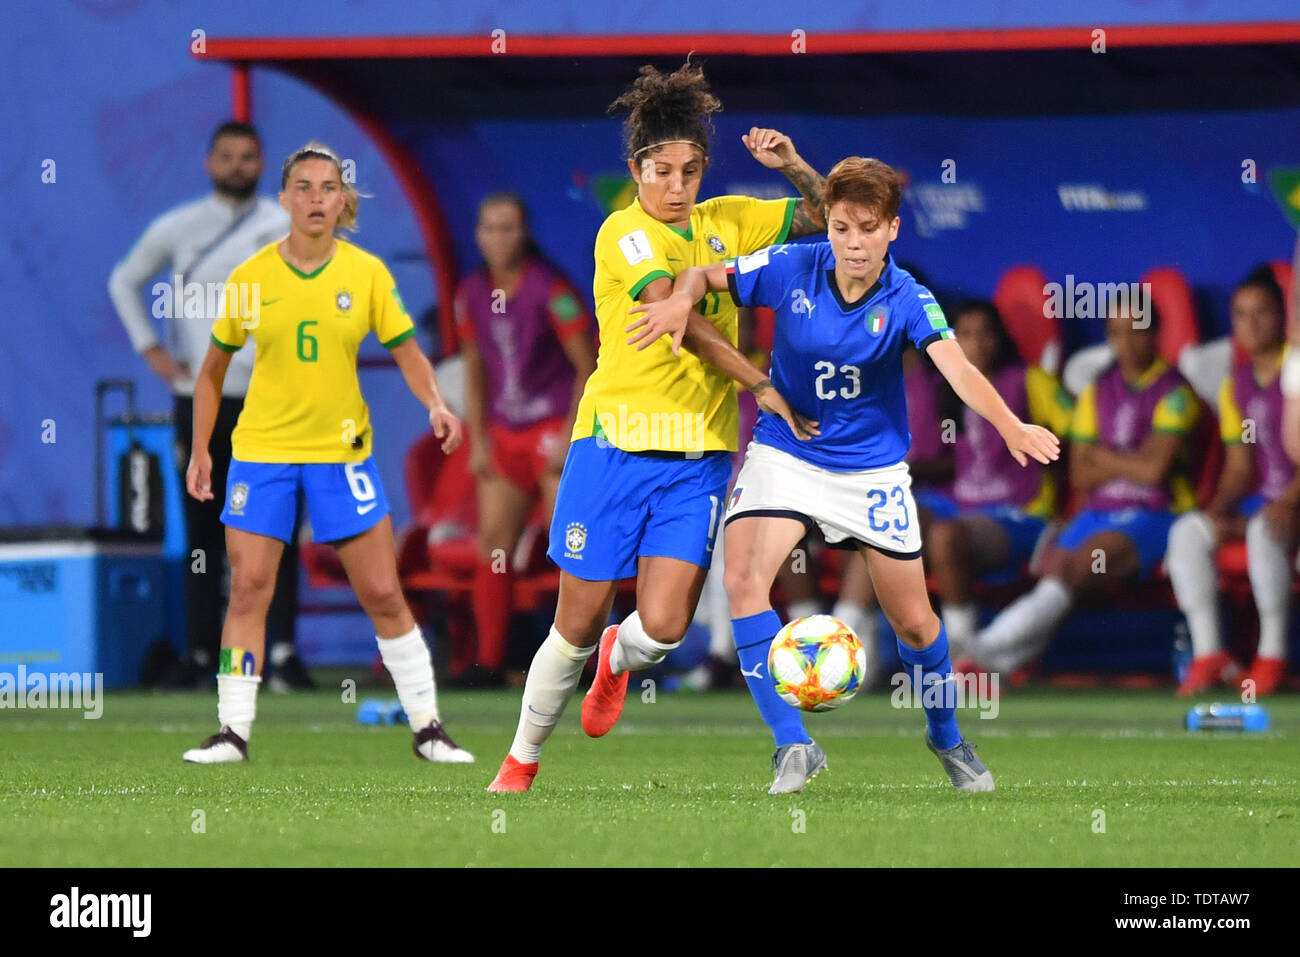 Valenciennes, Frankreich. 18th June, 2019. duels, match scene, duel, duel, tackle, tackling, momentum, action to the ball Cristiane (Brazil) (11) Manuela Giugliano (Italy) (23), 18.06.2019, Valenciennes (France), football, FIFA Women's World Cup 2019, Italy - Brazil, FIFA REGULATIONS PROHIBIT ANY USE OF PHOTOGRAPHS AS IMAGE SEQUENCES AND/OR QUASI VIDEO. | usage worldwide Credit: dpa/Alamy Live News Stock Photo